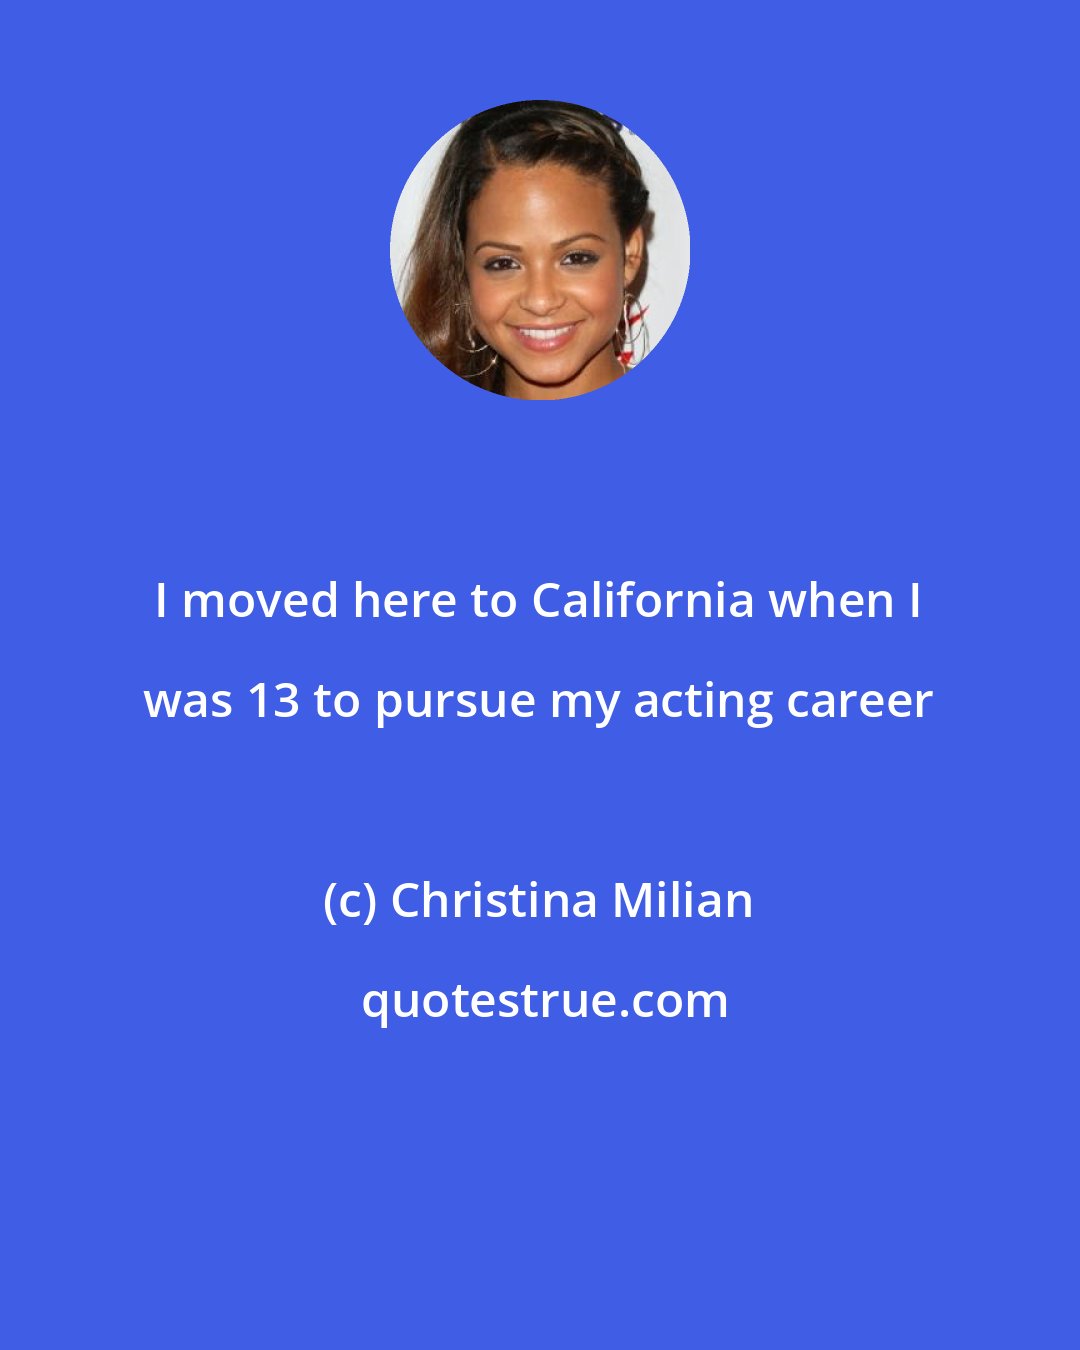 Christina Milian: I moved here to California when I was 13 to pursue my acting career